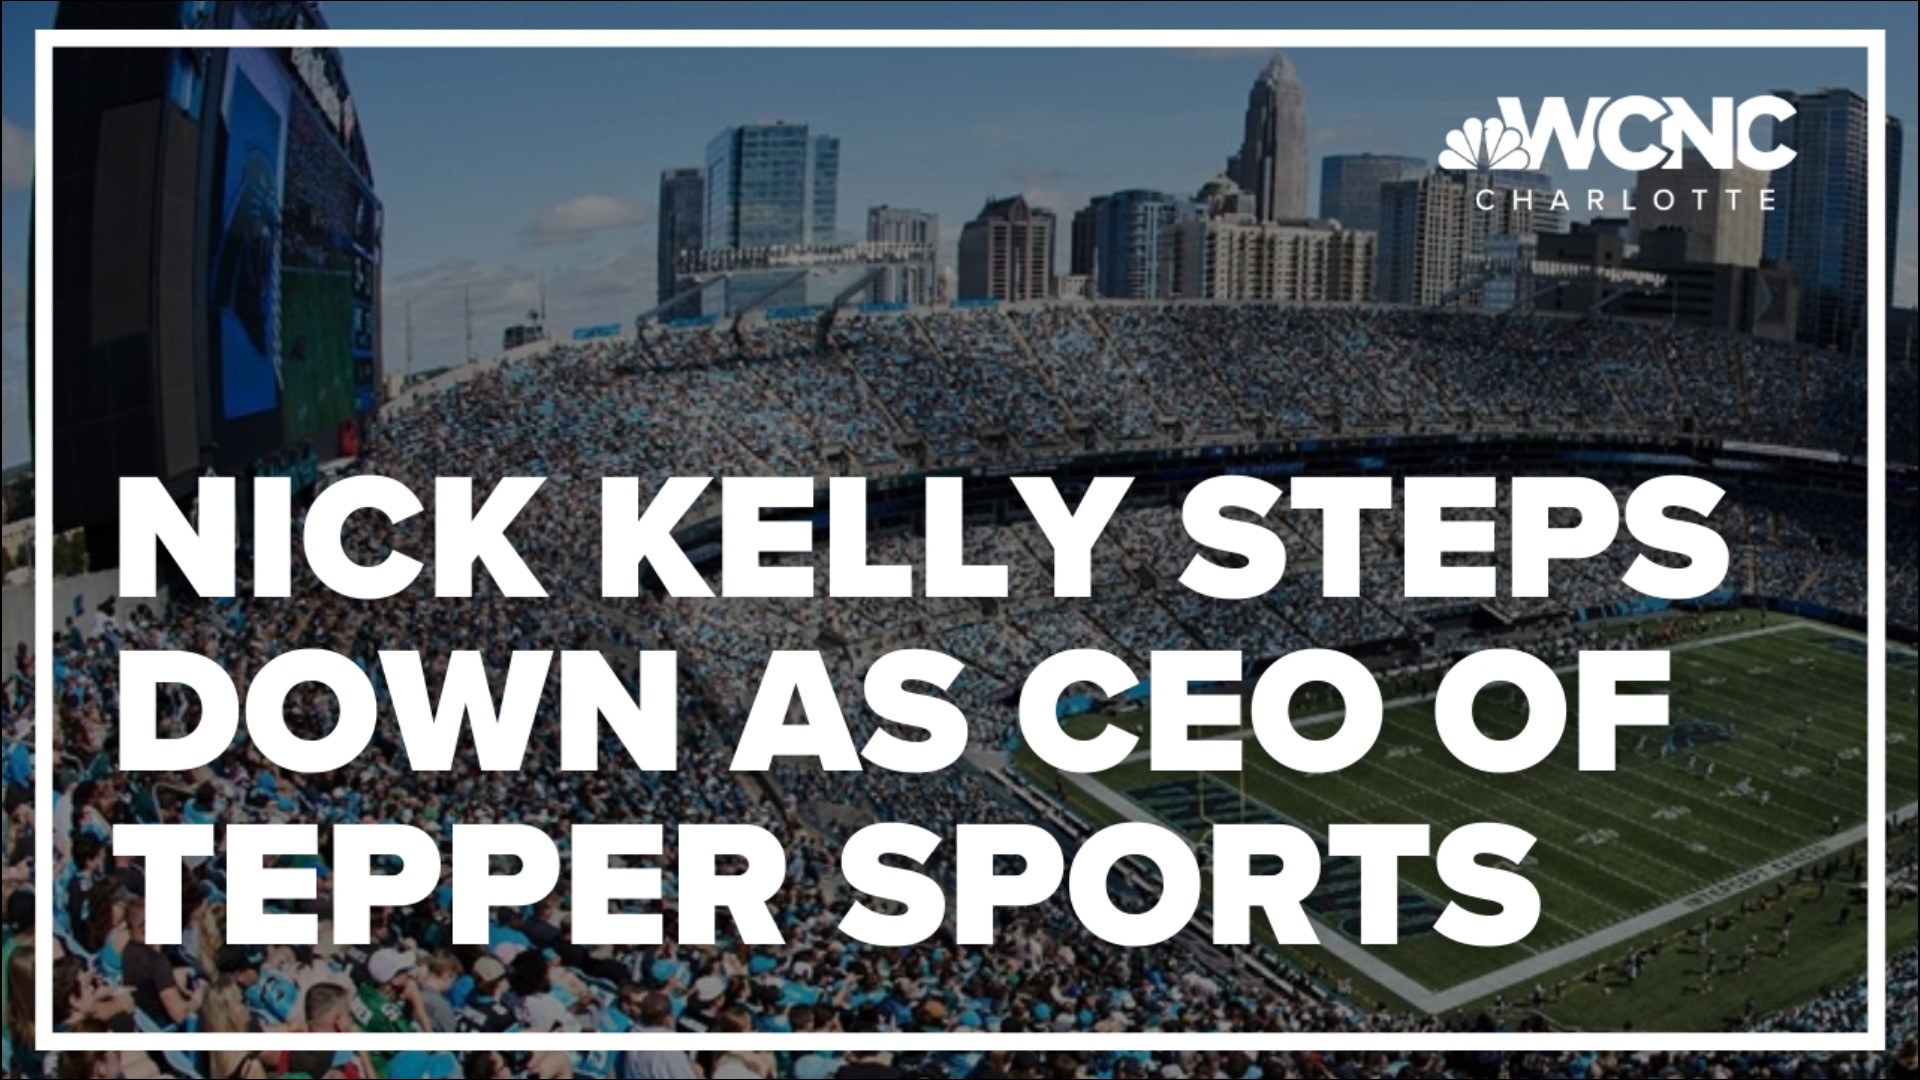 Nick Kelly was named CEO in February after serving as president of Charlotte FC. A replacement hasn't been named at this time.